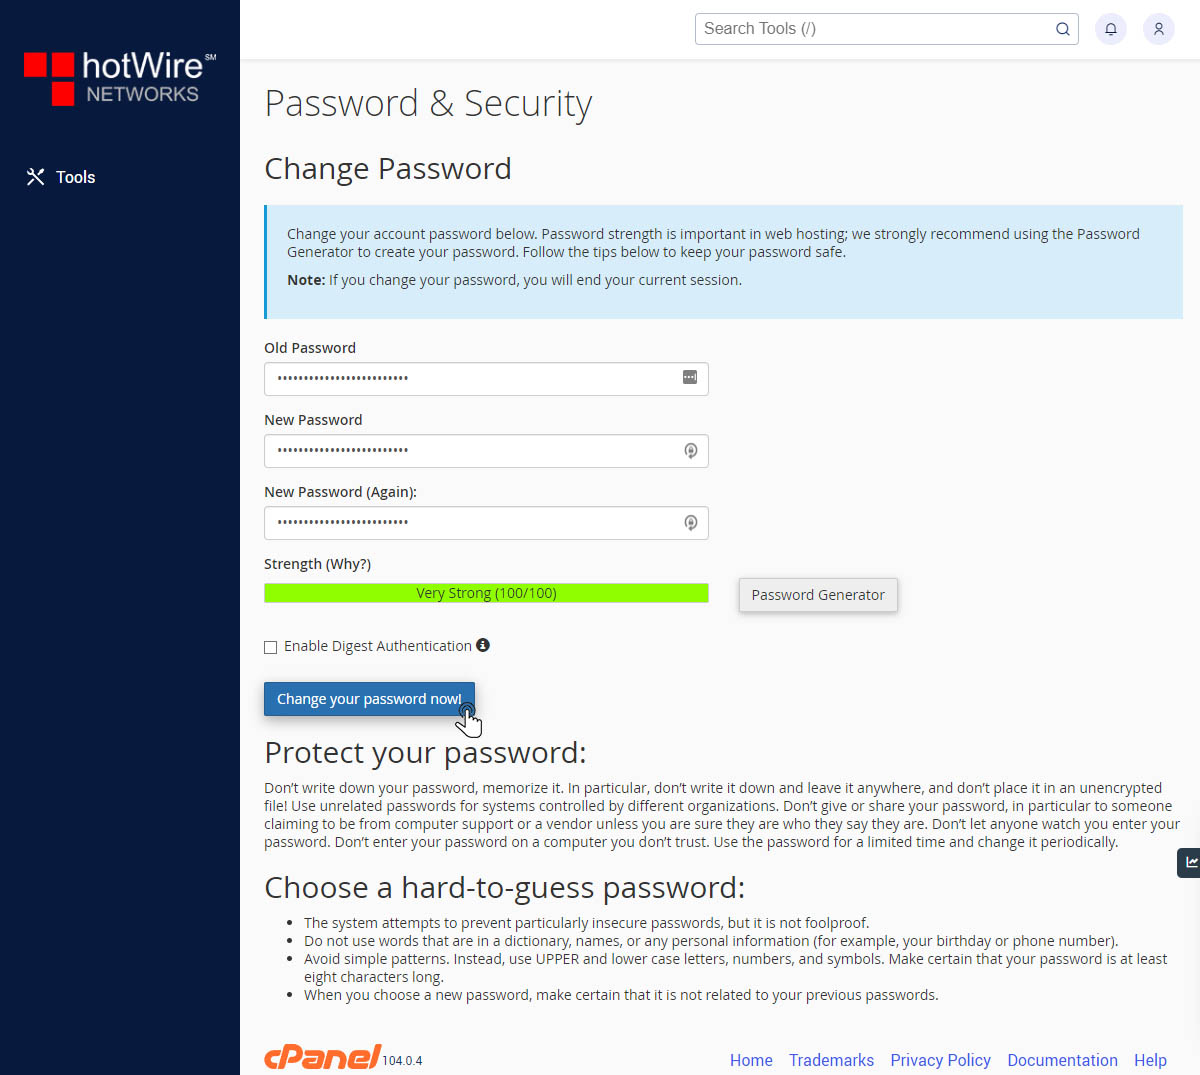 How to change the Password in cPanel 3